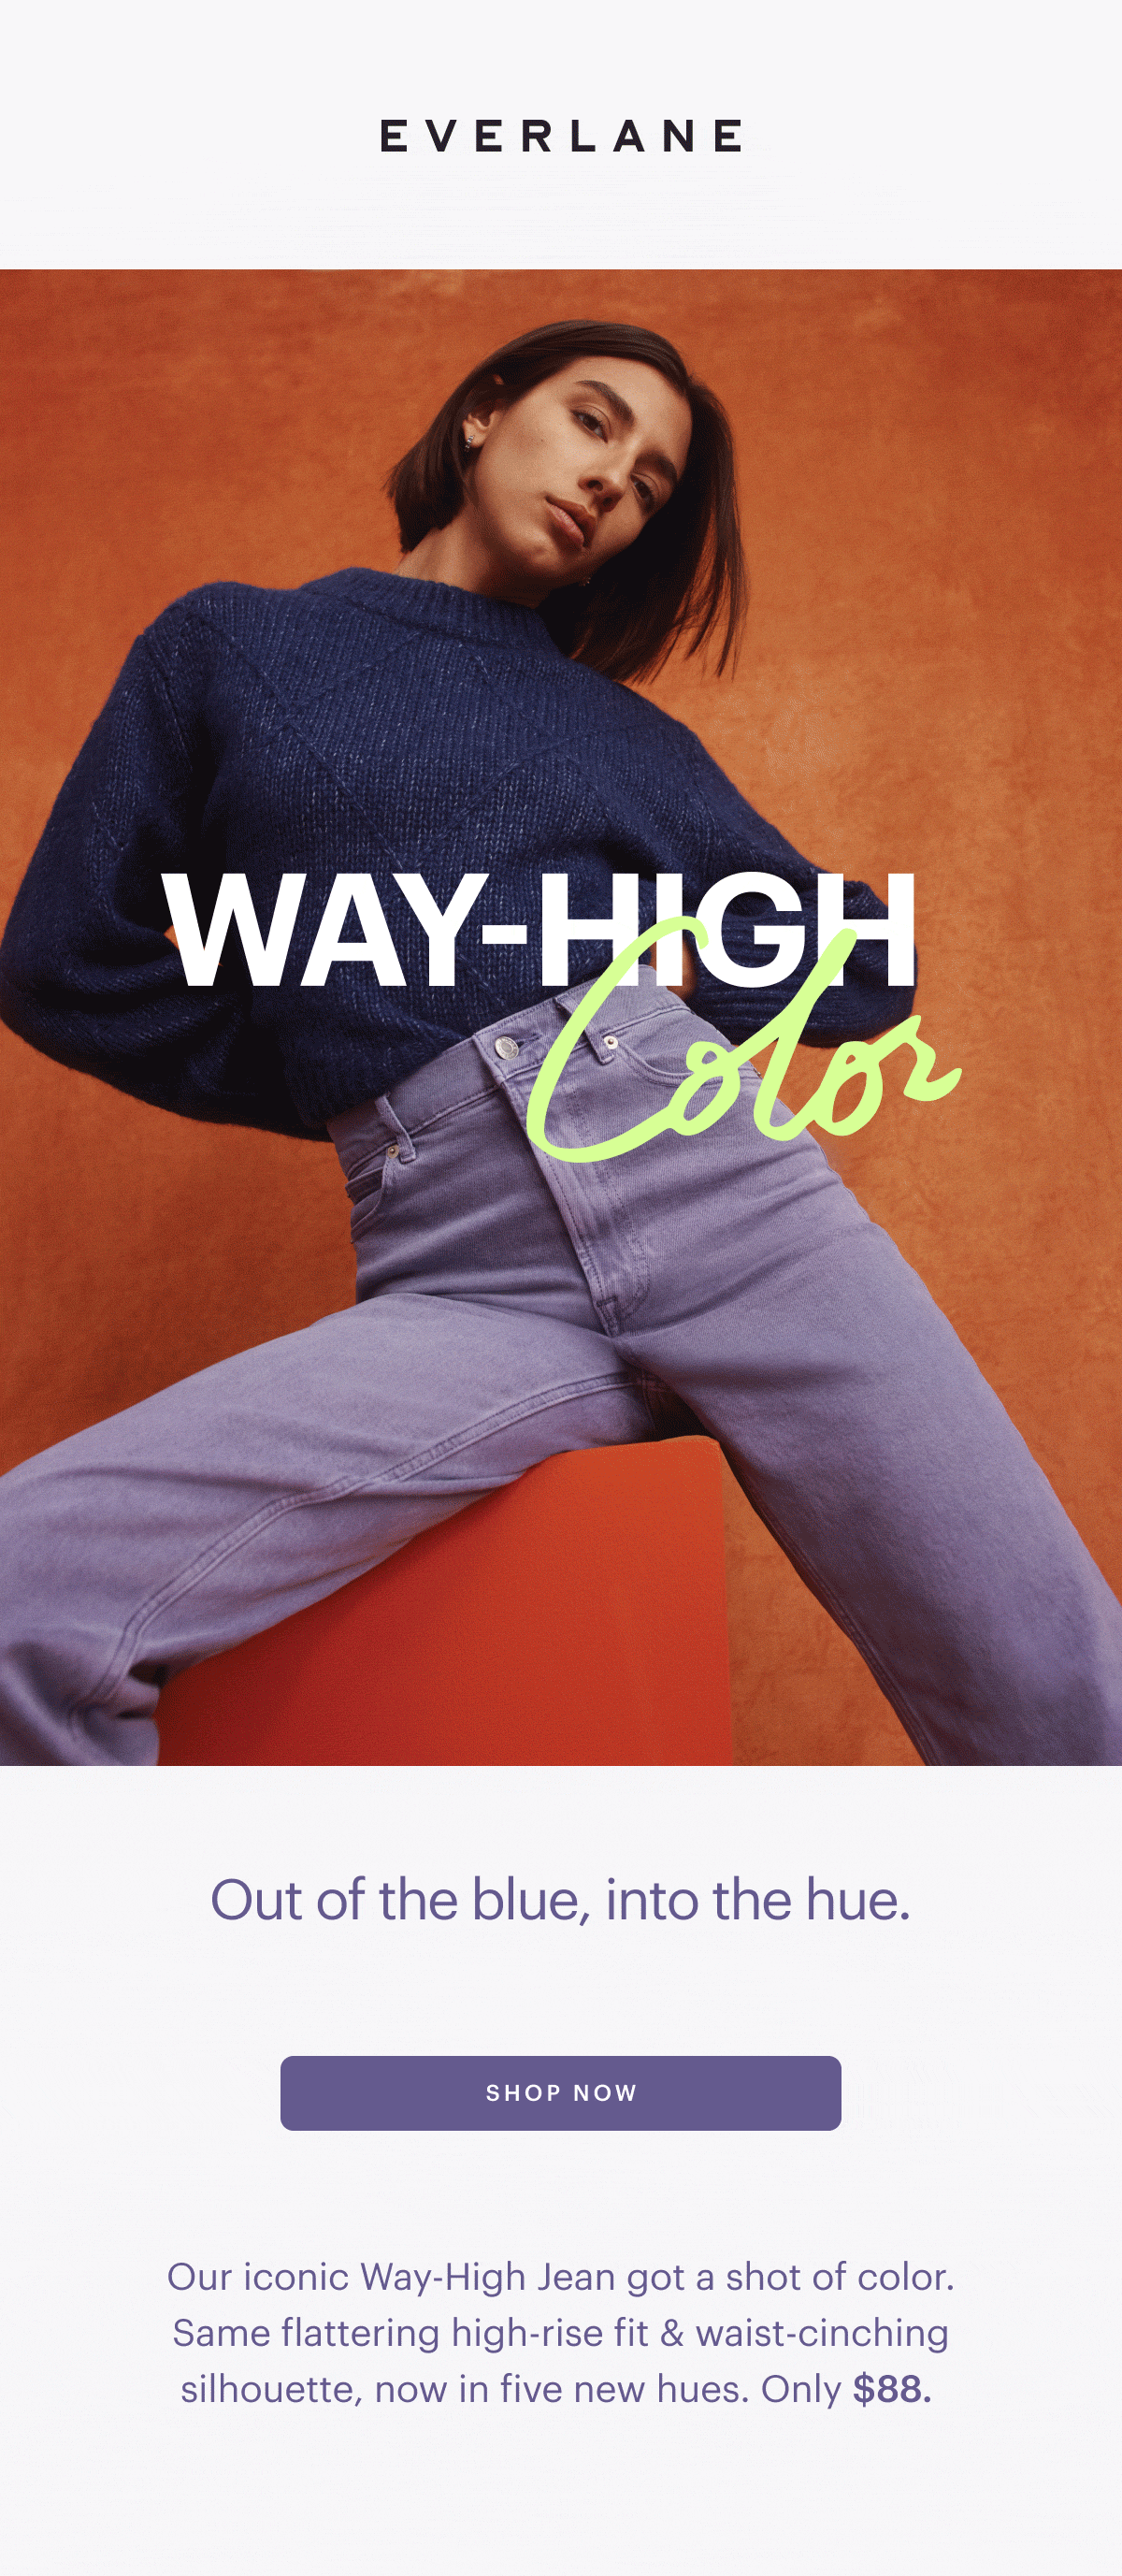 EVERLANE Out of the blue, into the hue. Our iconic Way-High Jean got a shot of color. Same flattering high-rise fit waist-cinching silhouette, now in five new hues. Only $88. 